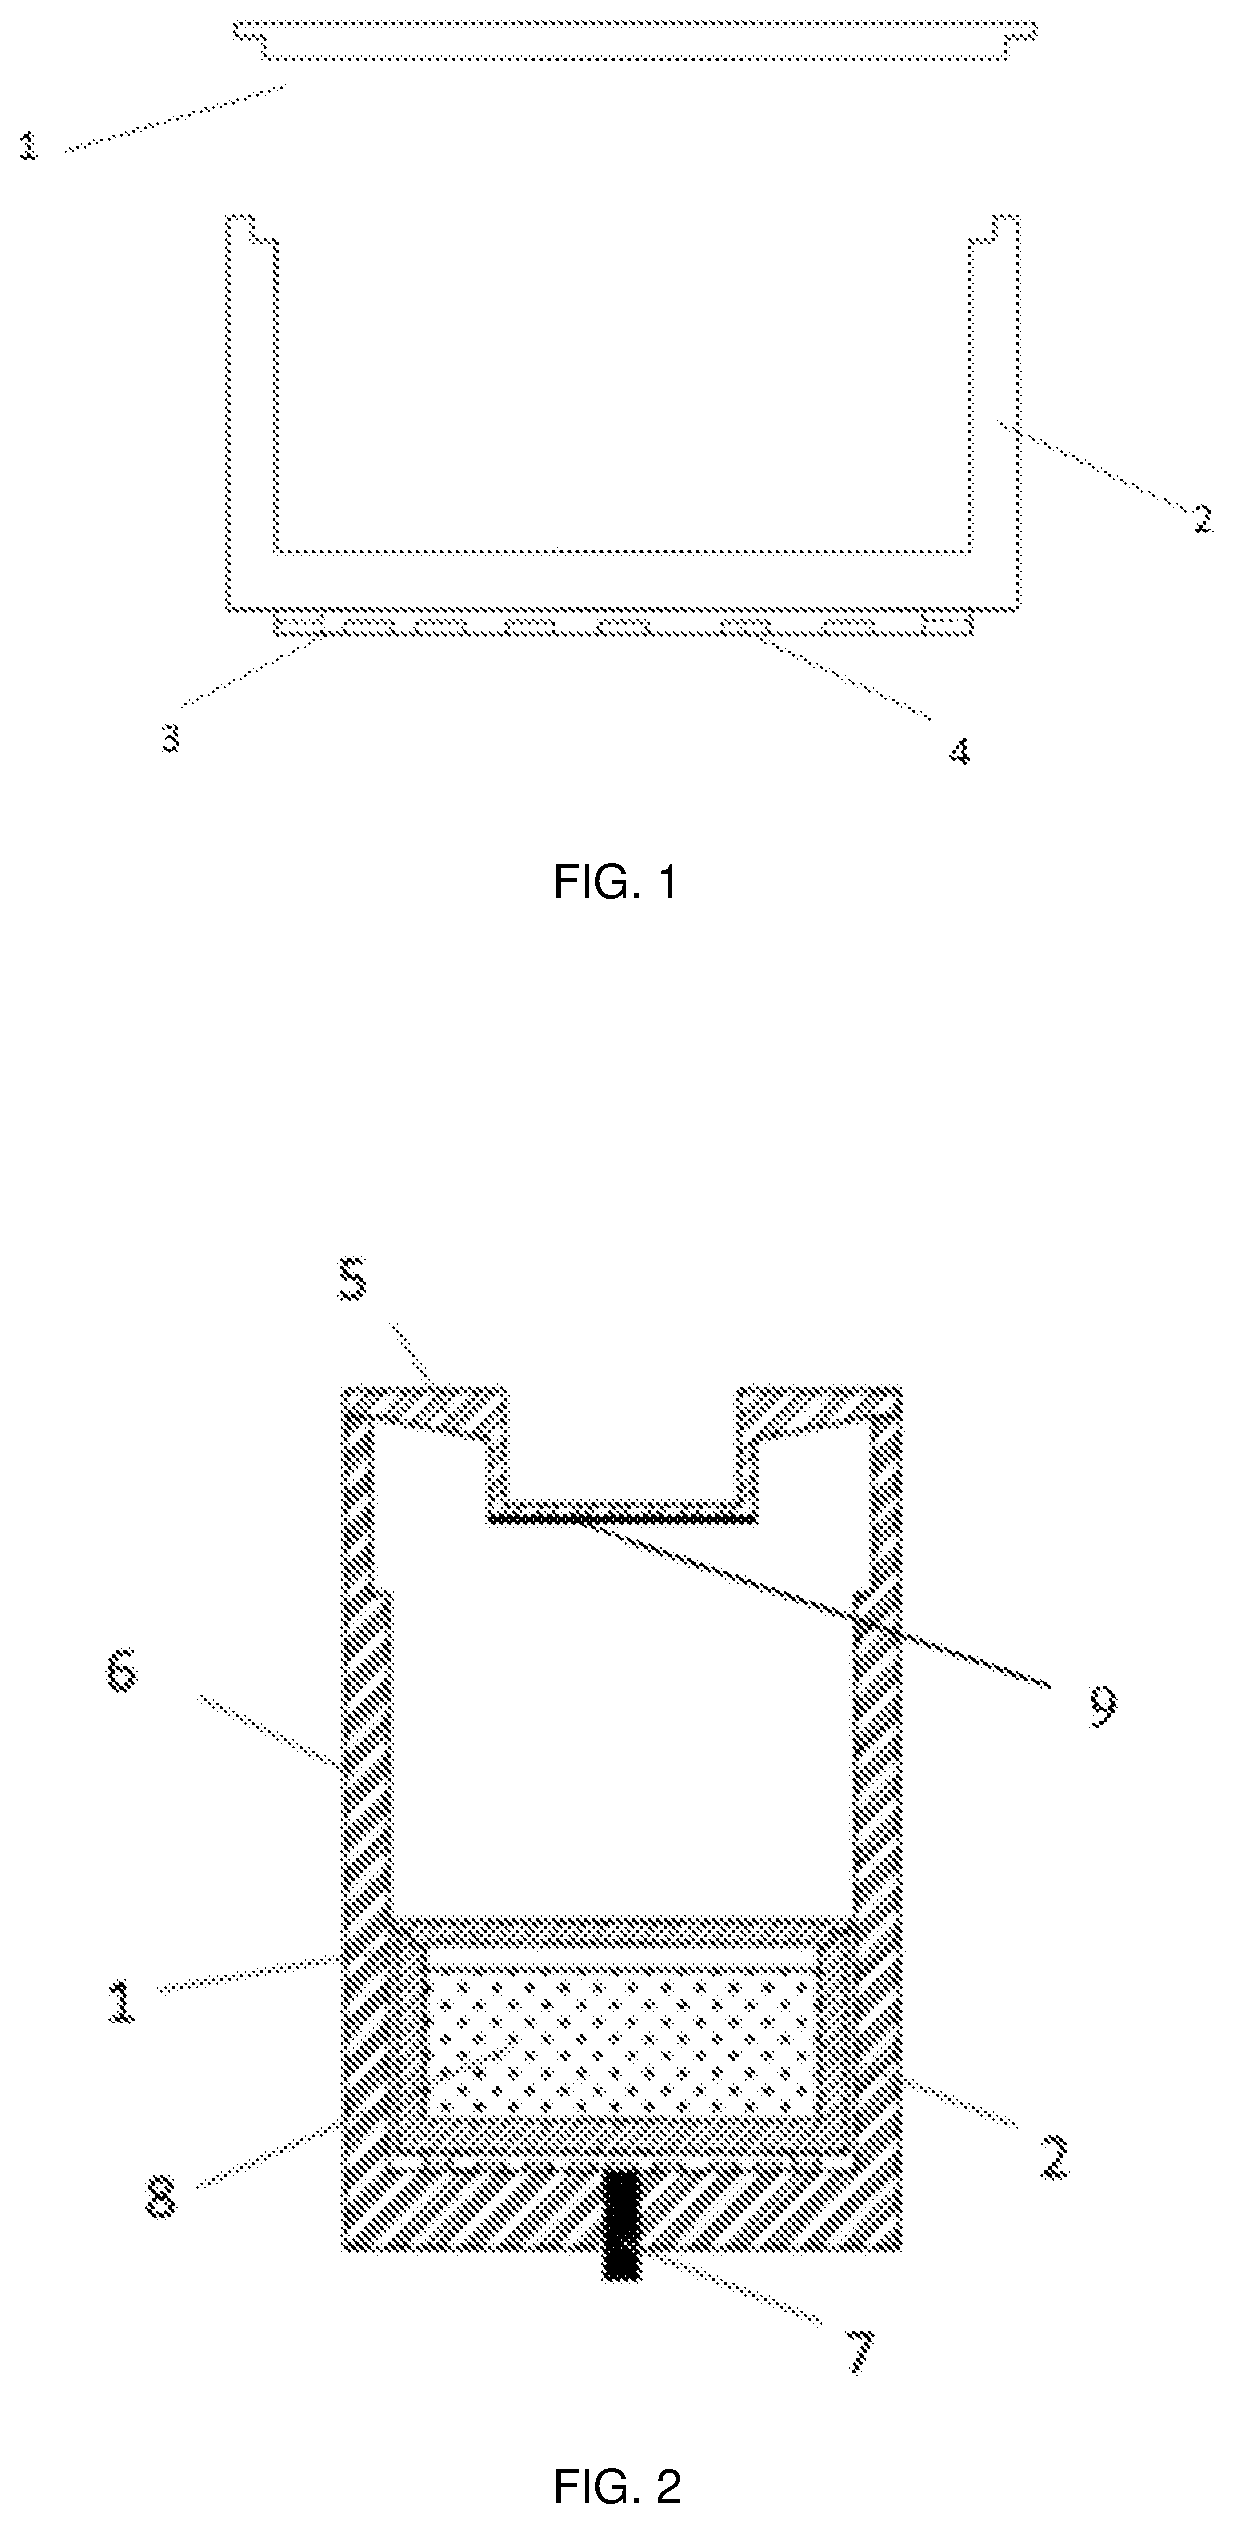 High-purity semi-insulating silicon carbide crystal growing apparatus and method therefor